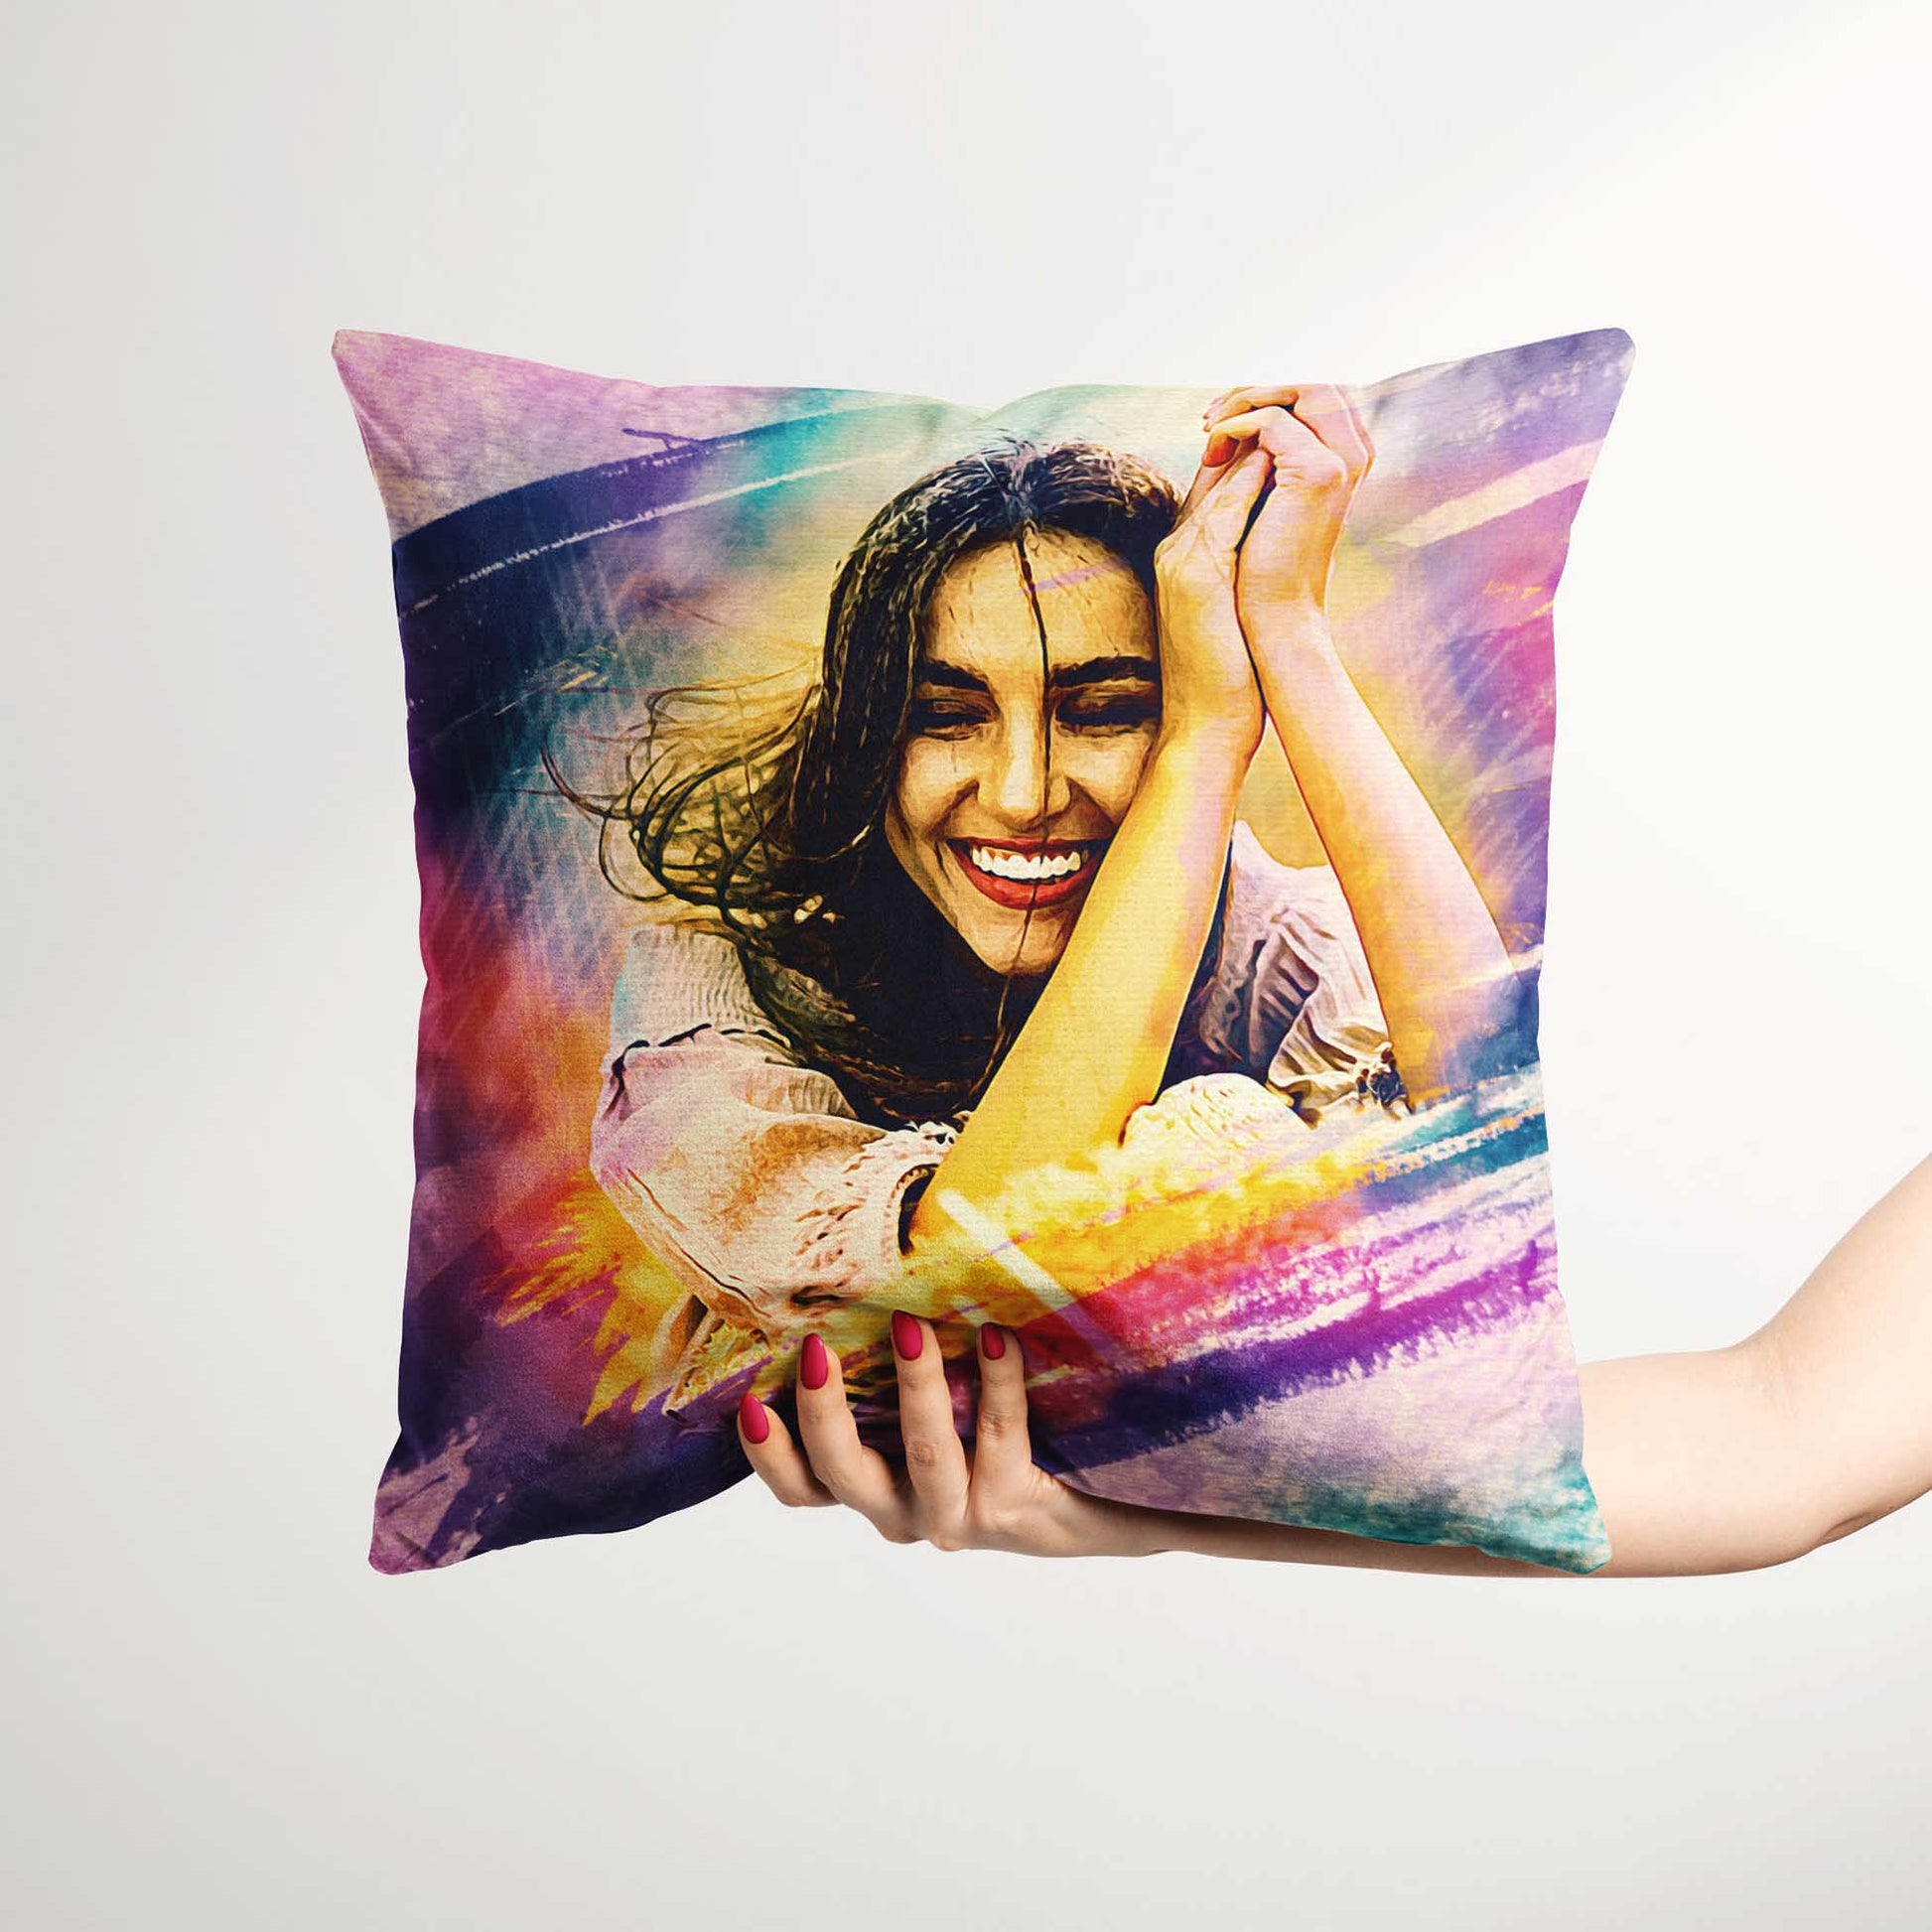 Add a pop of creativity to your home with the Personalised Artistic Brush Painting Cushion. Crafted with care from plush velvet fabric, this handmade cushion features a print from your photo, making it a truly unique and original art